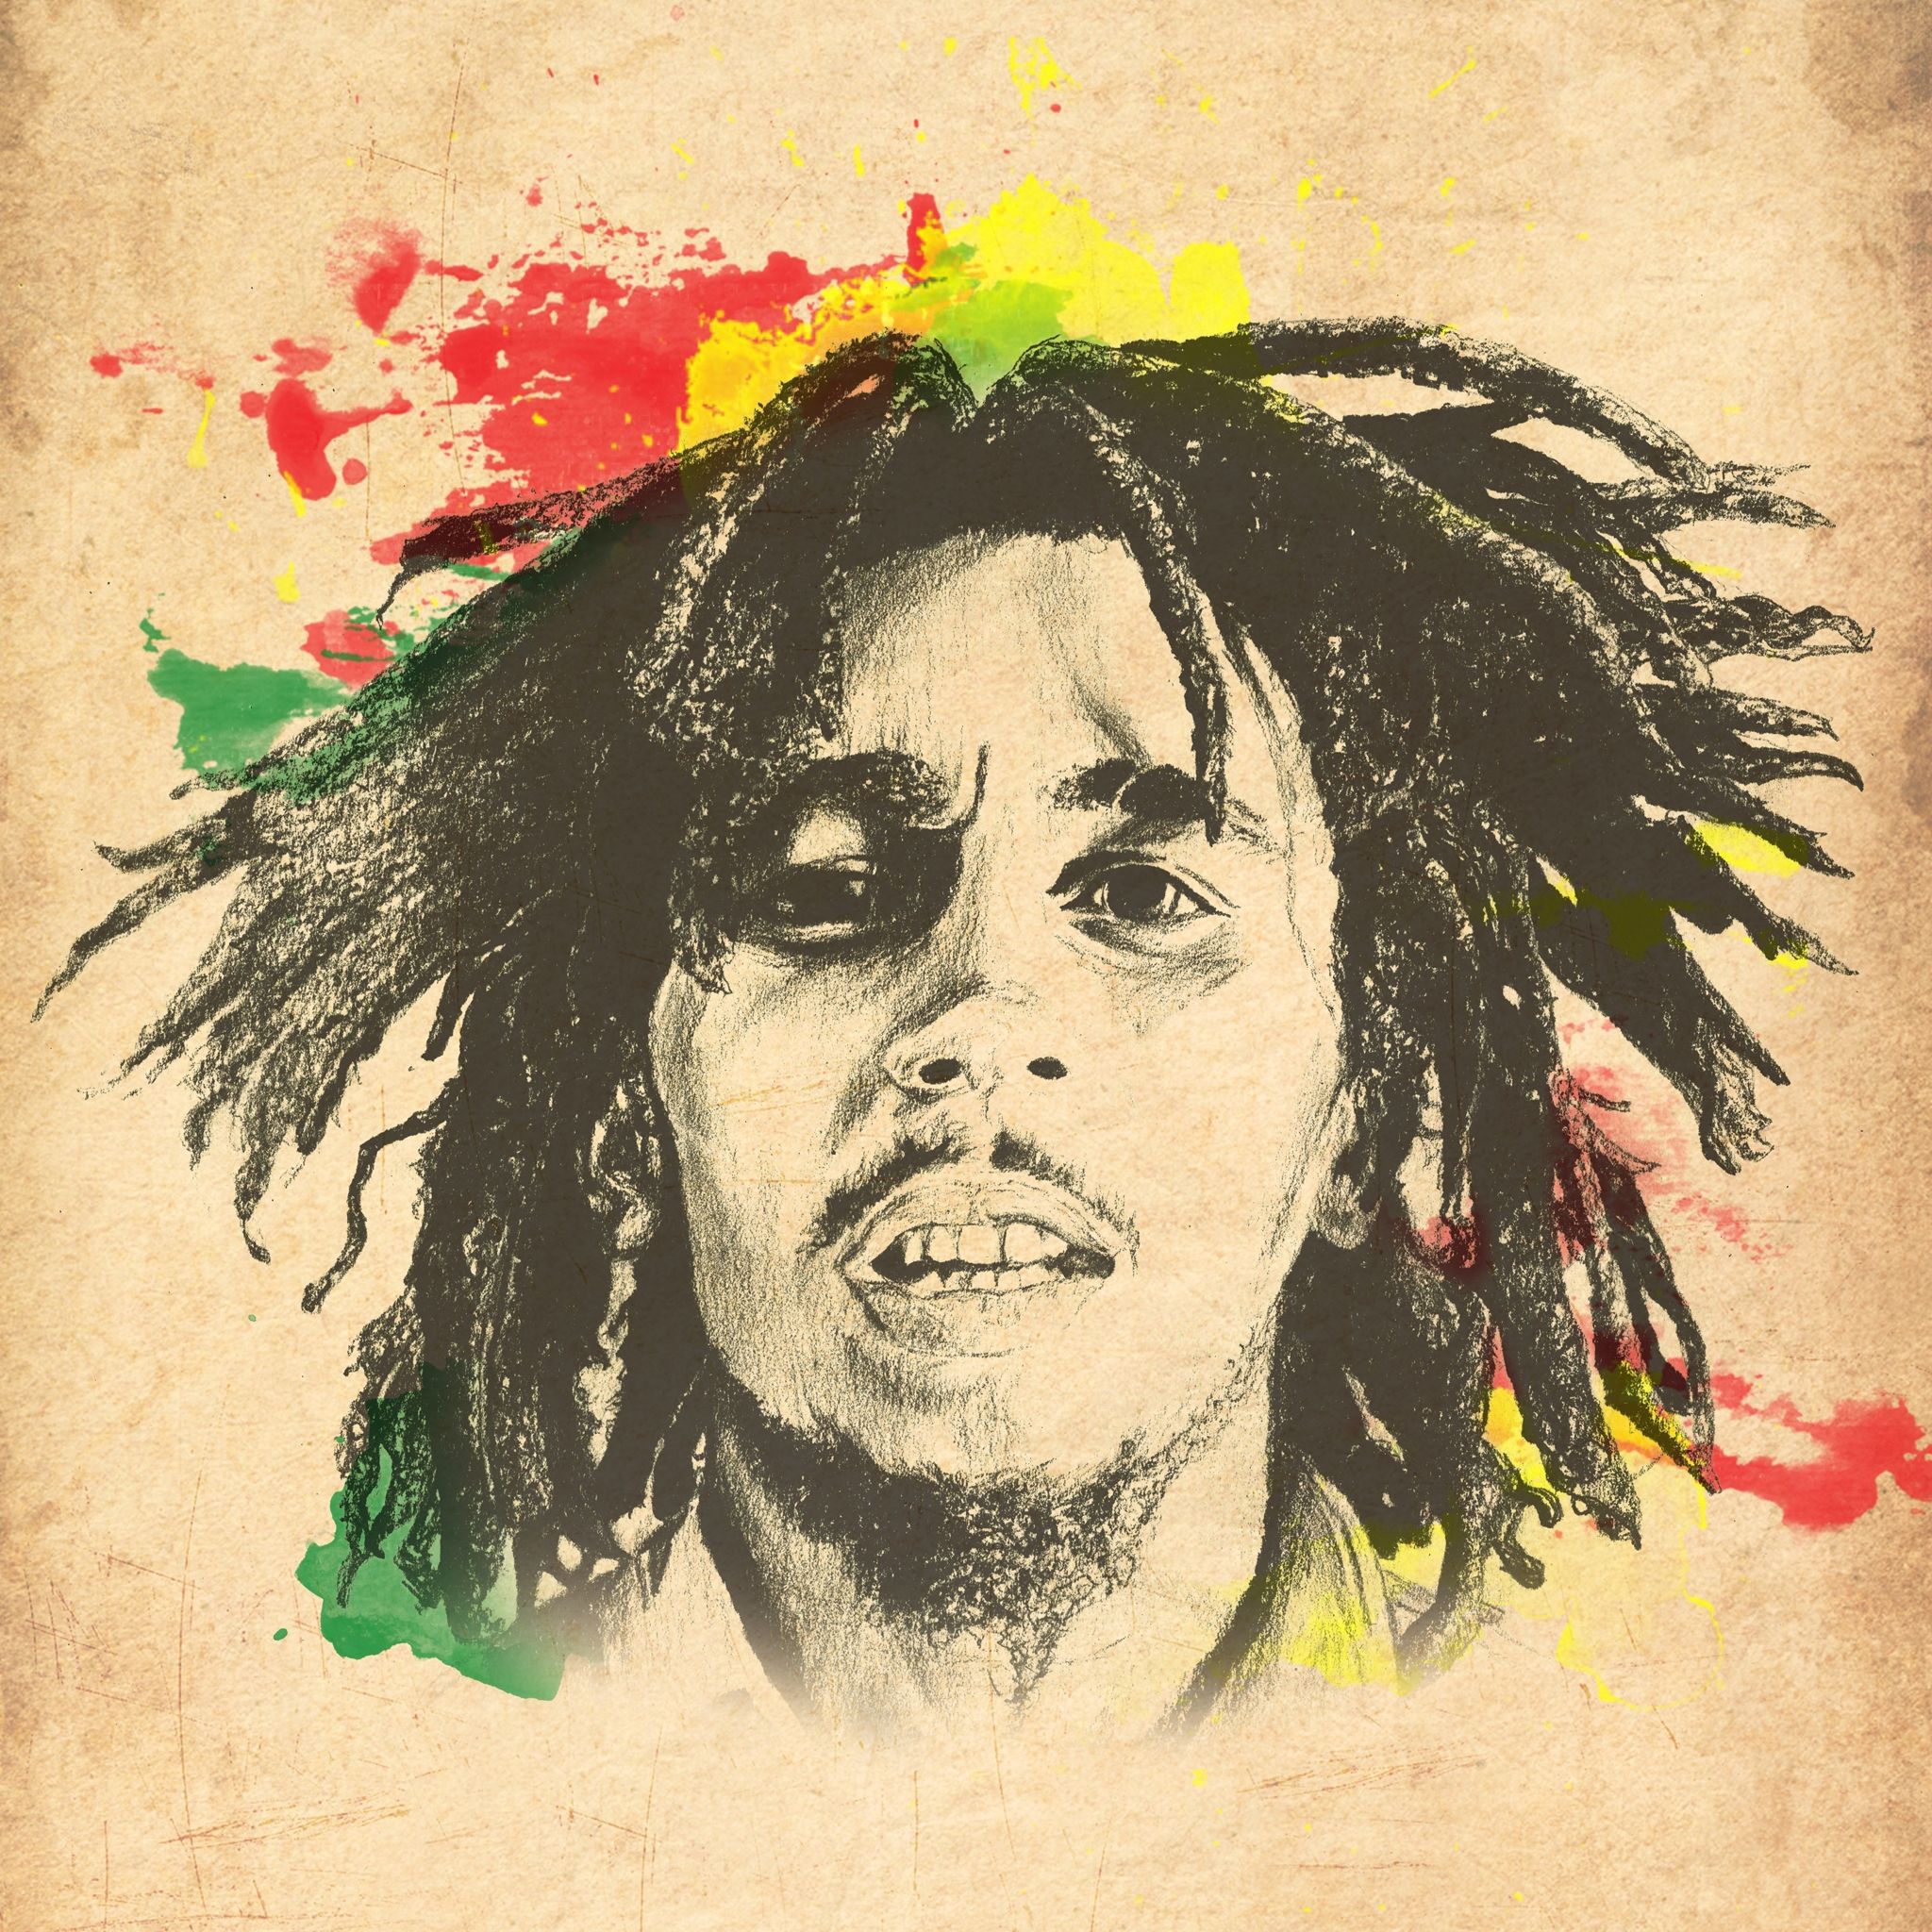 Bob Marley Wallpaper Image Photos Pictures Background